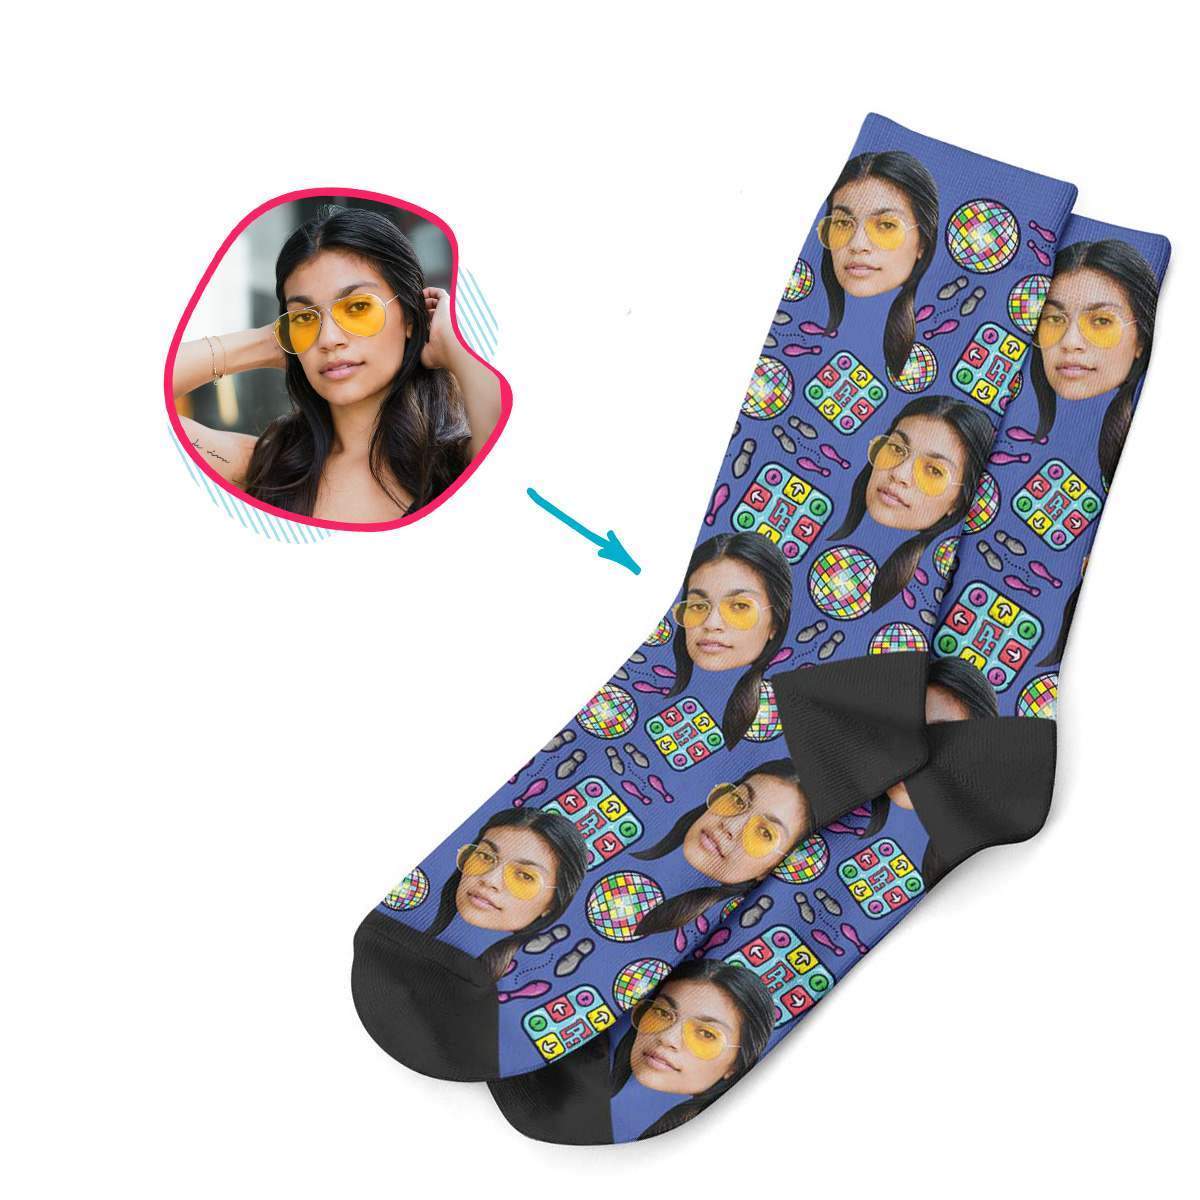 darkblue Dancing socks personalized with photo of face printed on them